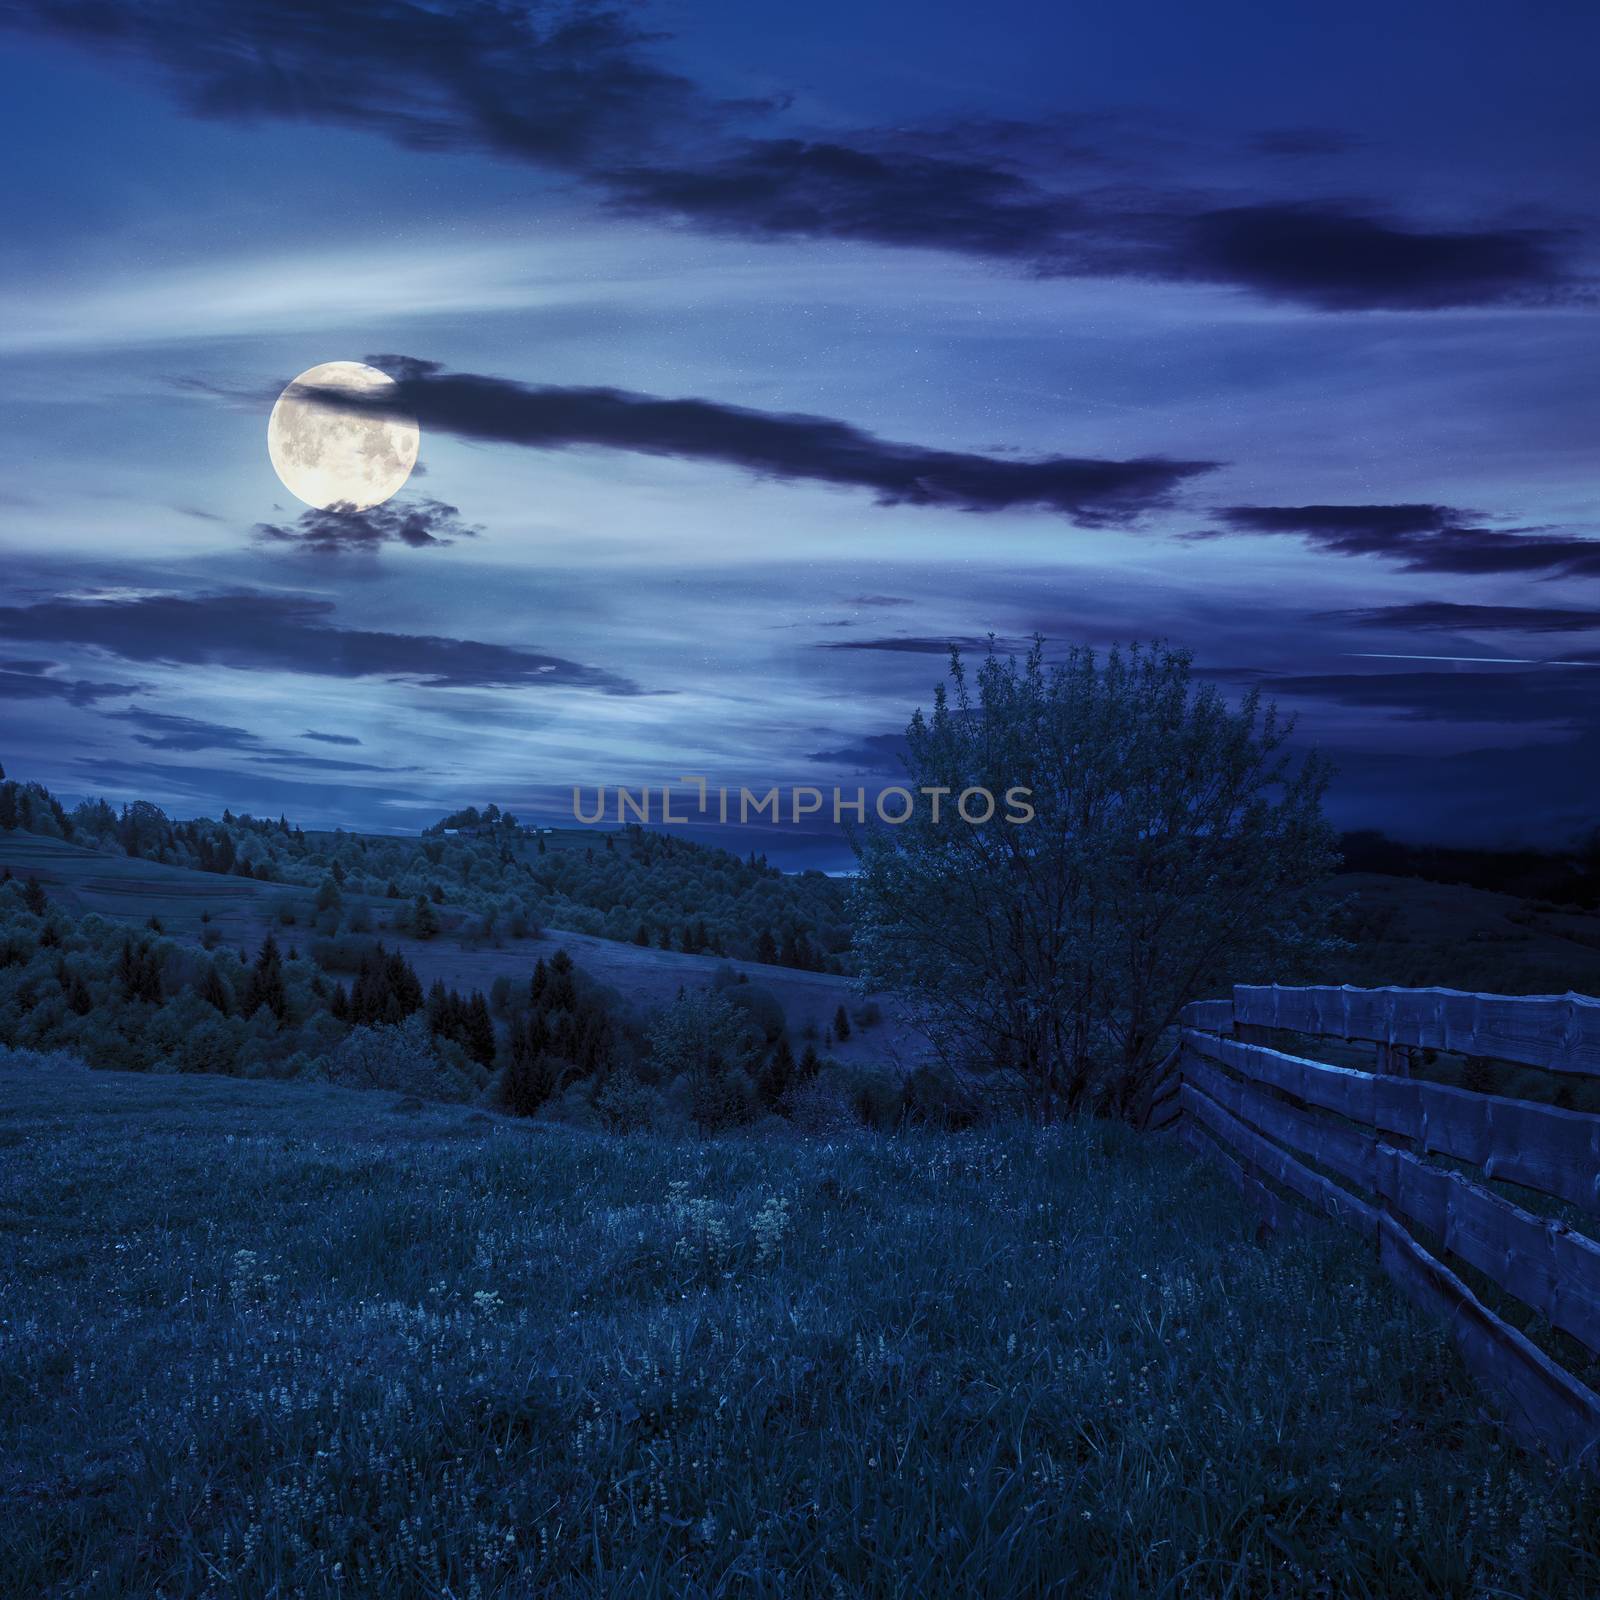 autumn landscape. fence near the meadow path on the hillside. forest in fog on the mountain at night in full moon light